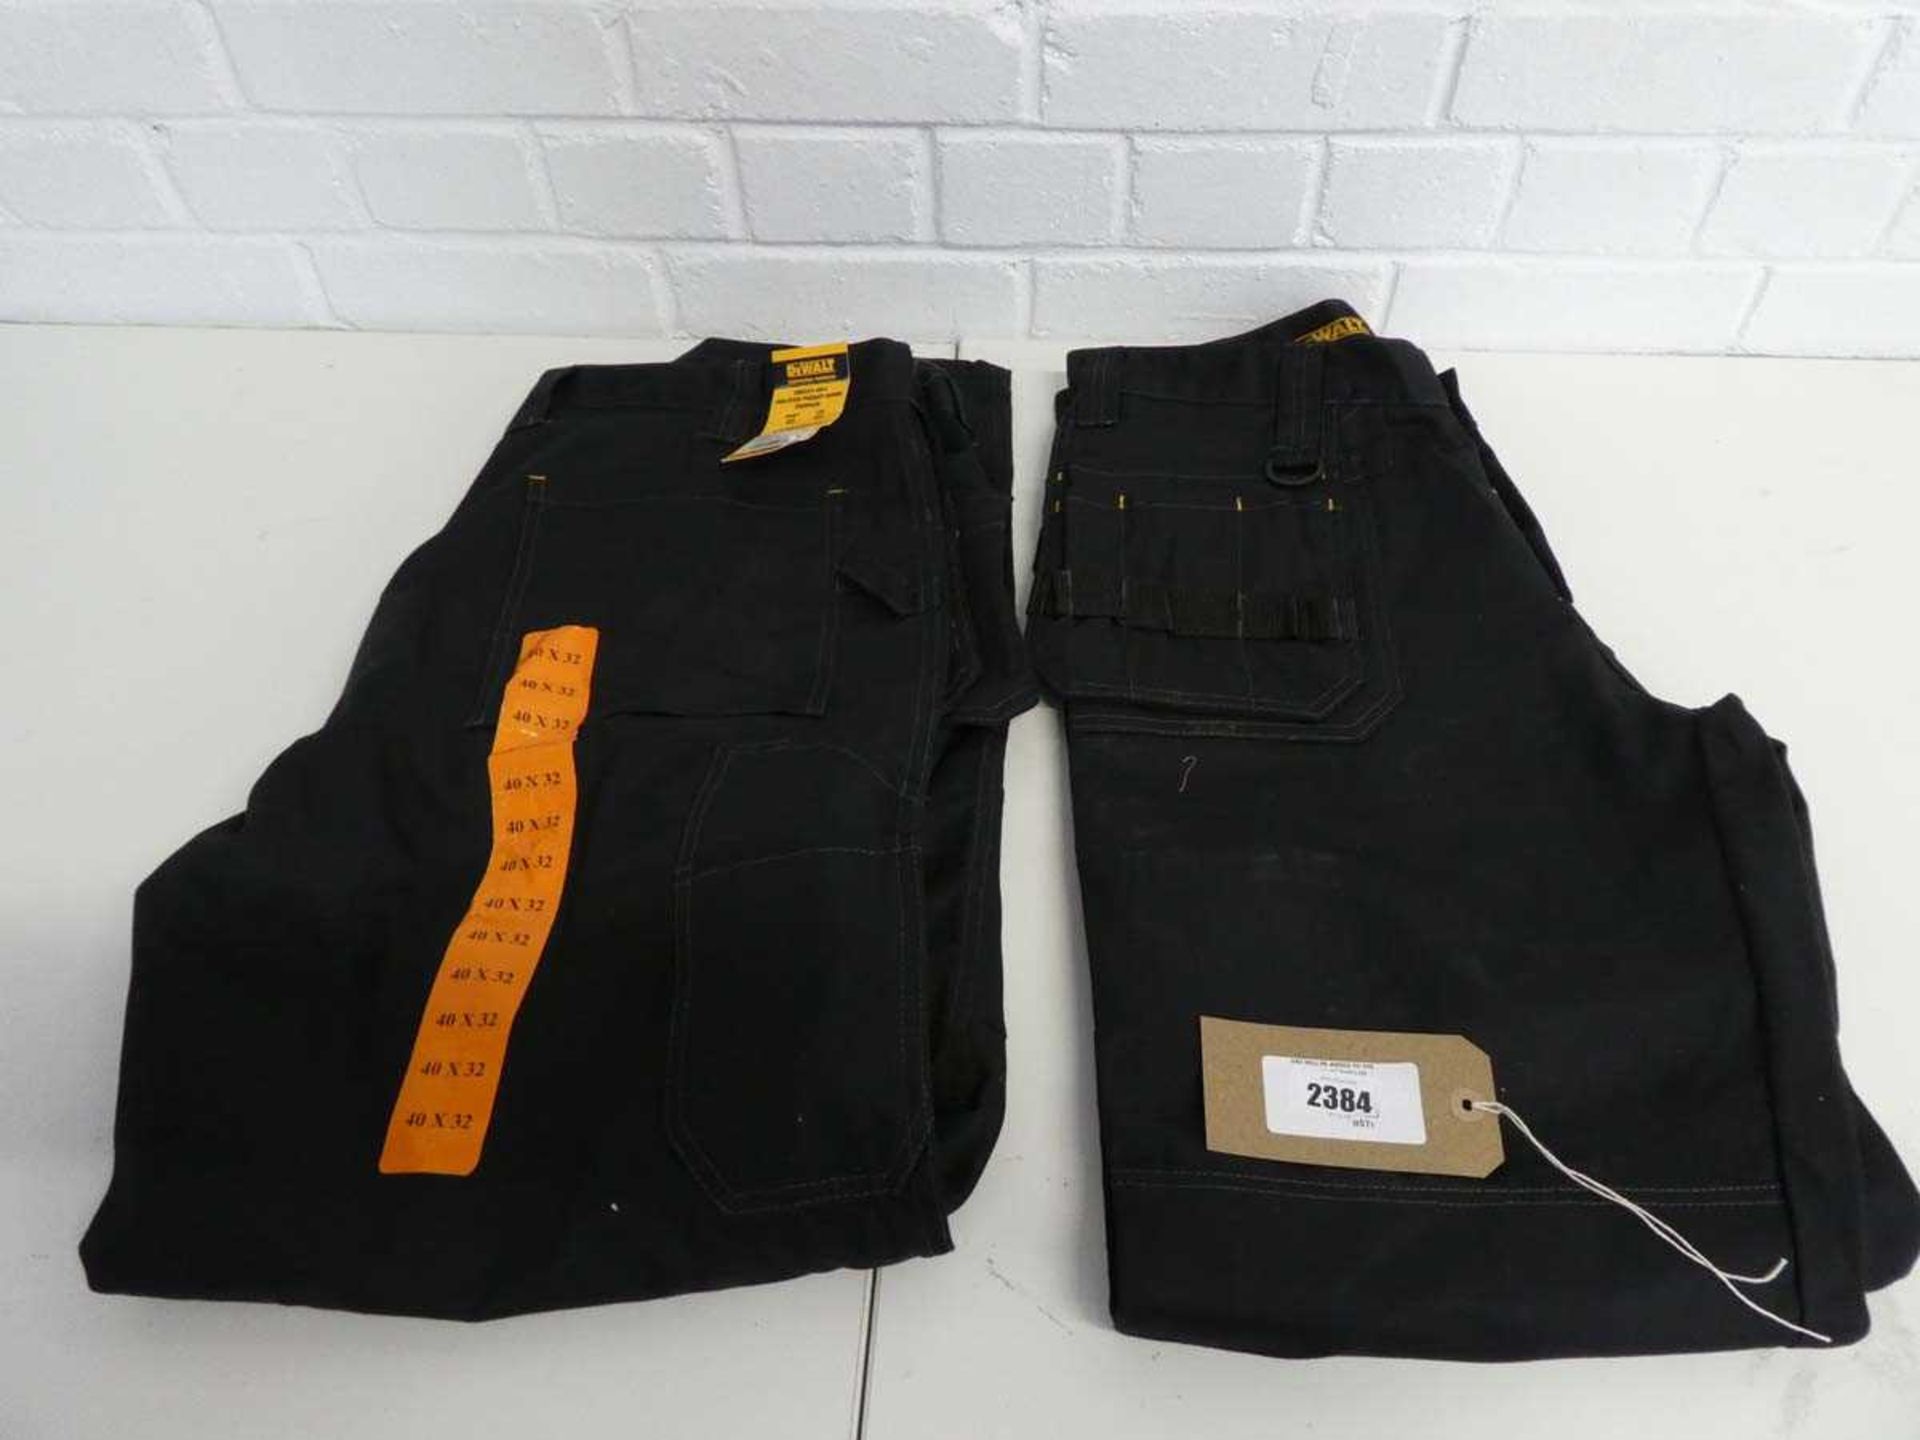 +VAT 2 pairs of DeWalt multi pocket work trousers, size 40 by 32 and 34 by 32